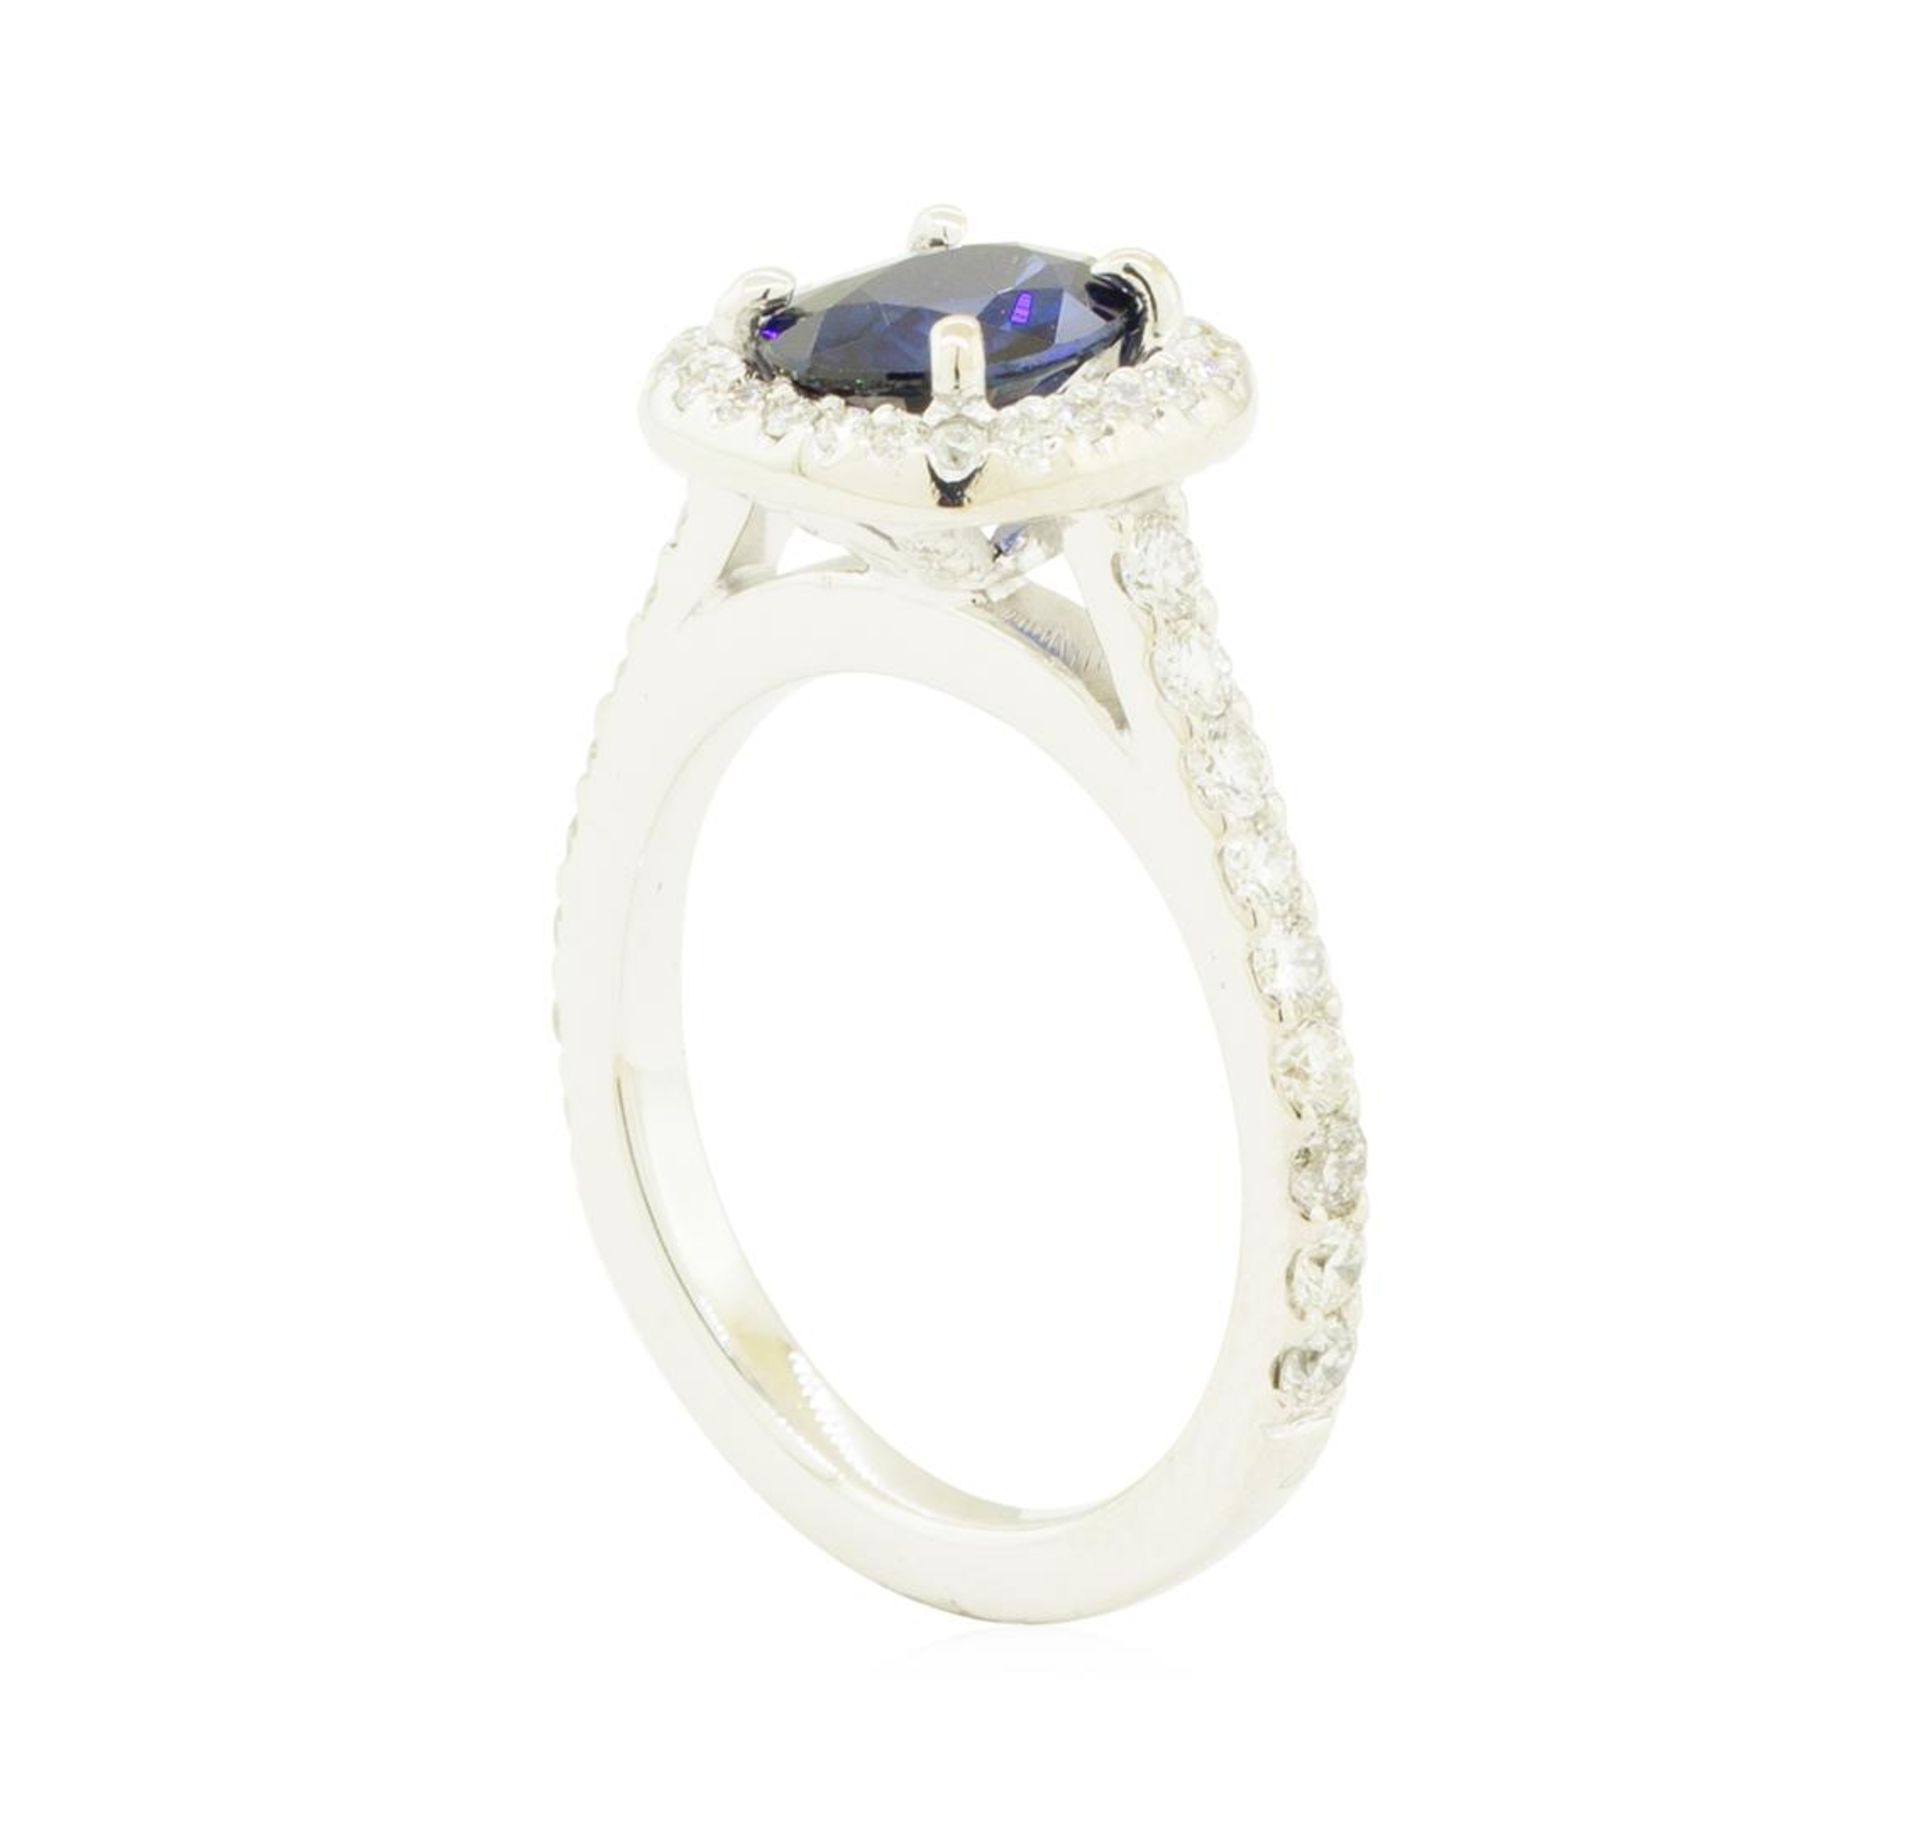 1.94 ctw Oval Brilliant Blue Sapphire And Diamond Ring - 14KT White Gold - Image 4 of 5